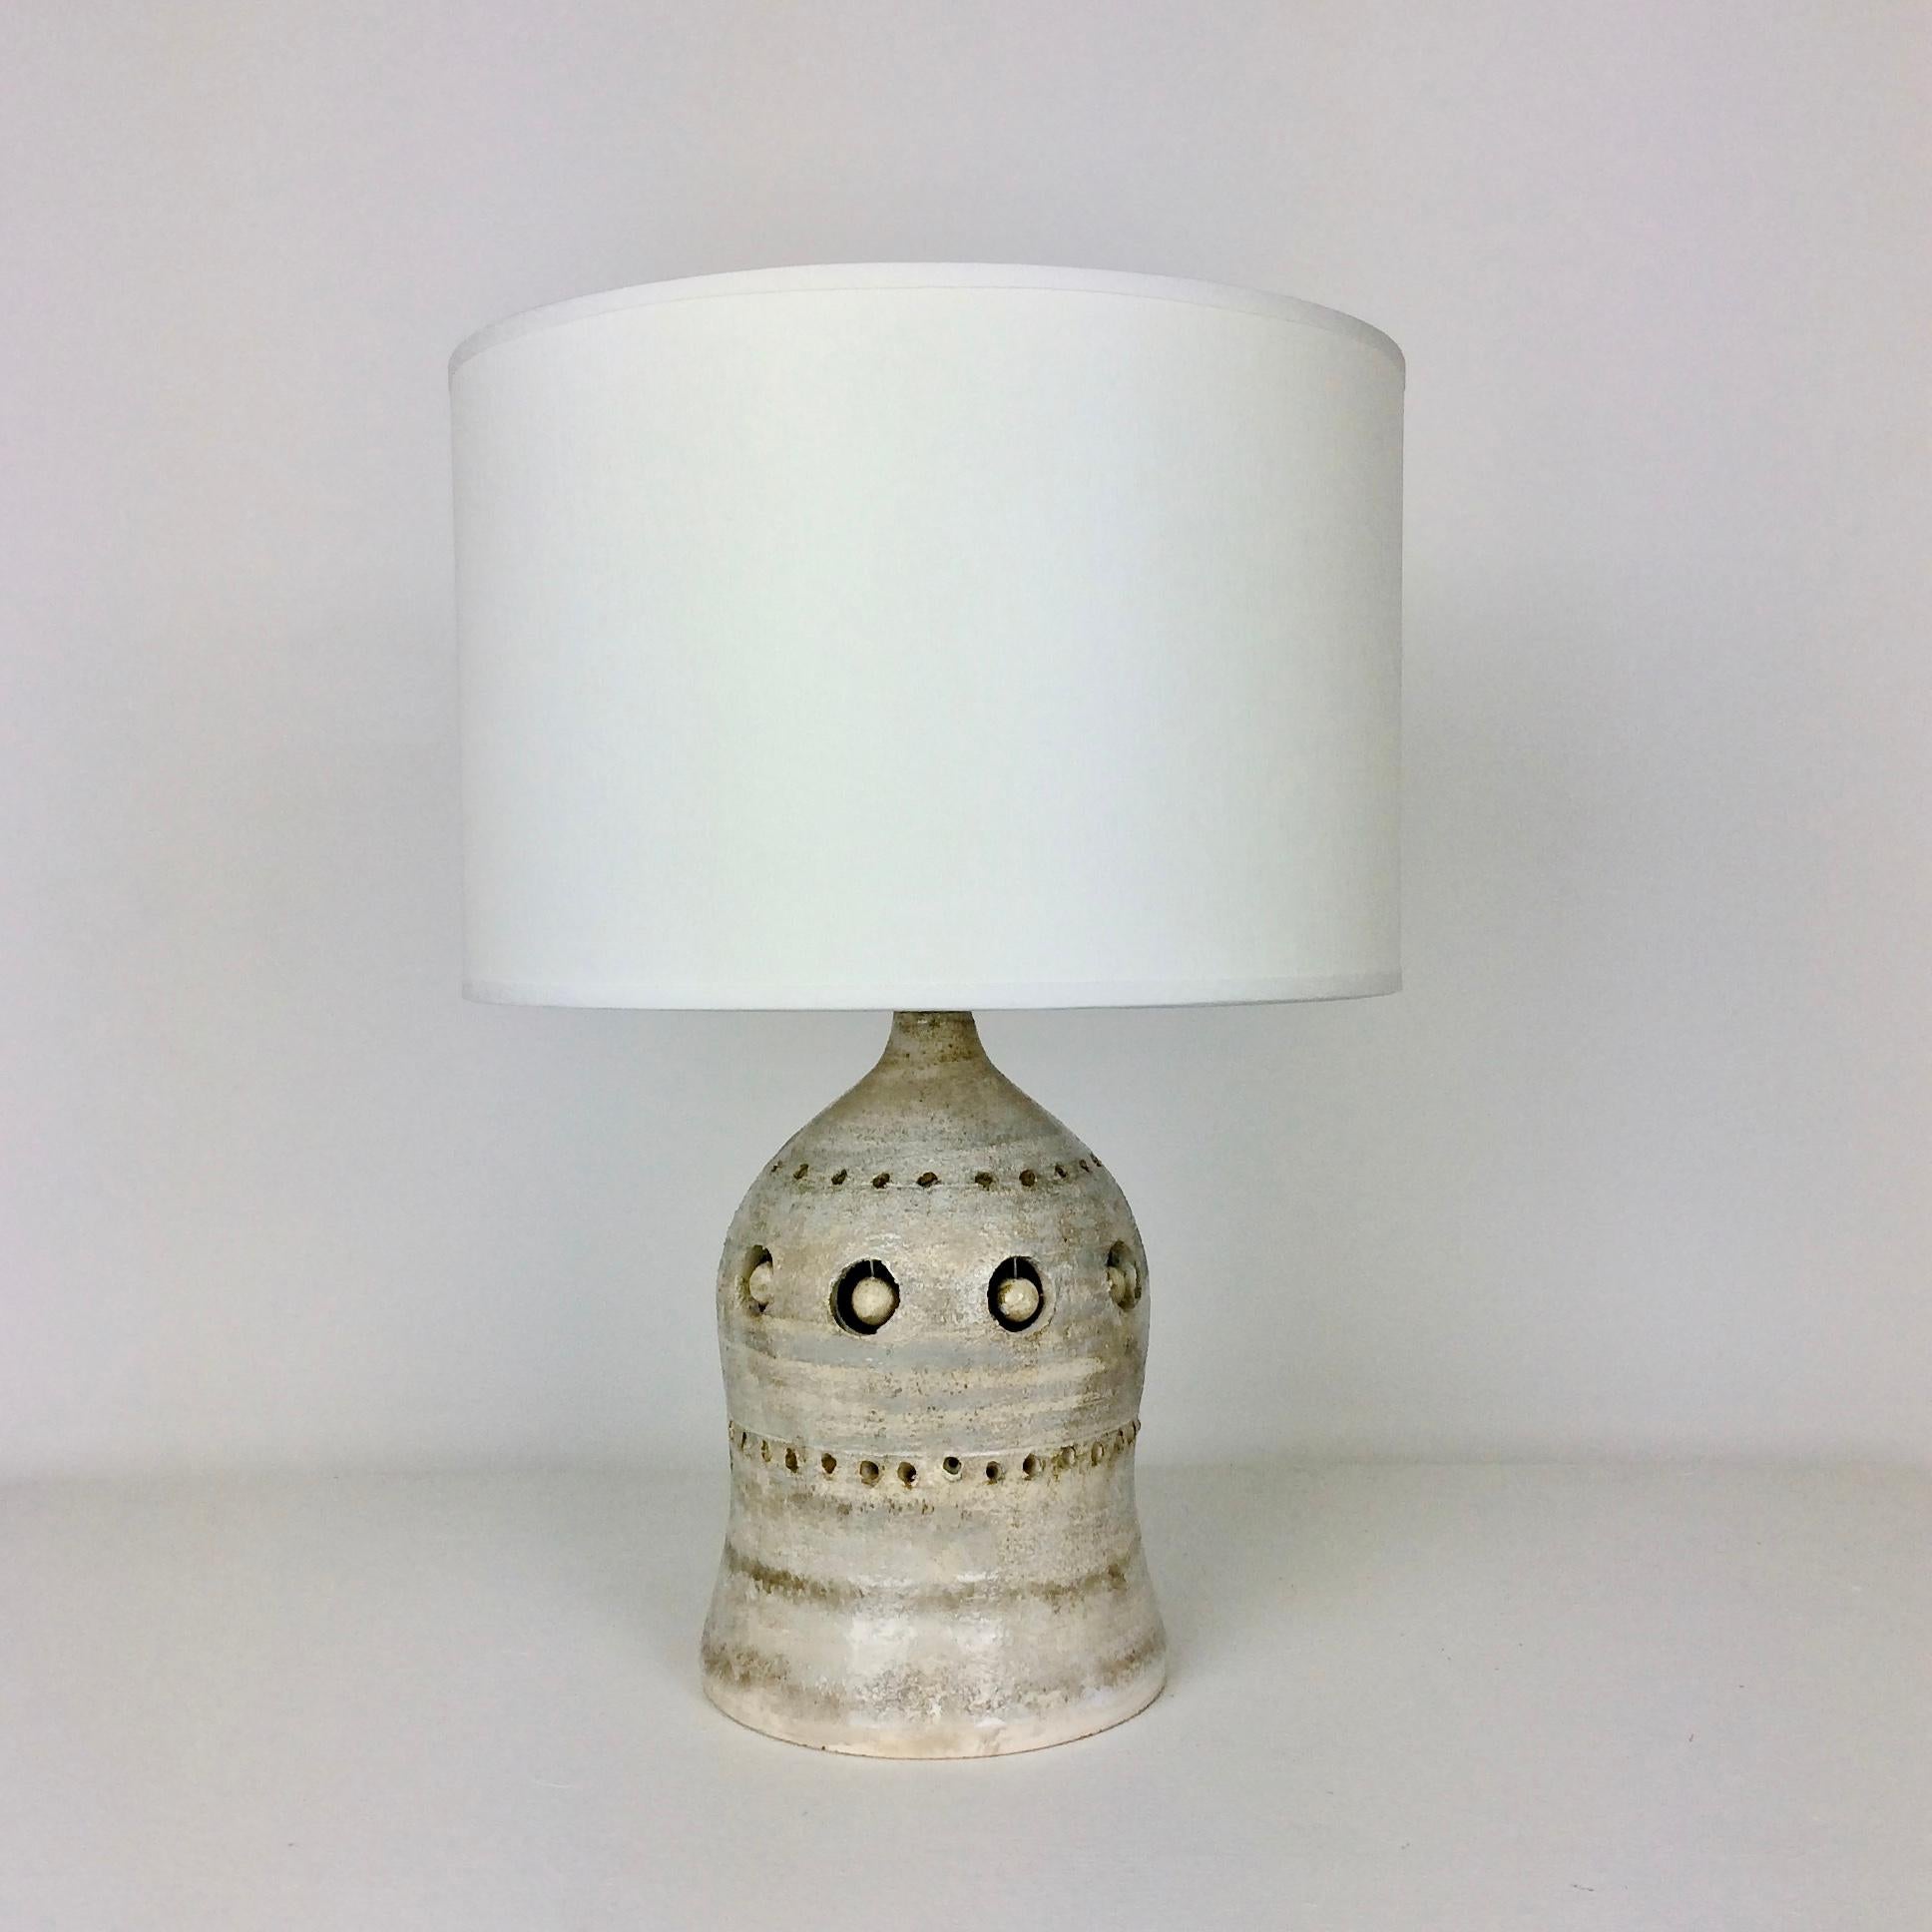 Georges Pelletier table lamp, circa 1970, France.
White or grey incised and hand painted ceramic.
New white fabric shade. Rewired.
One E22 bulb of 40W and one E14 bulb of 15 W inside the ceramic.
Dimensions: 35 cm height, diameter 25 cm.
Good